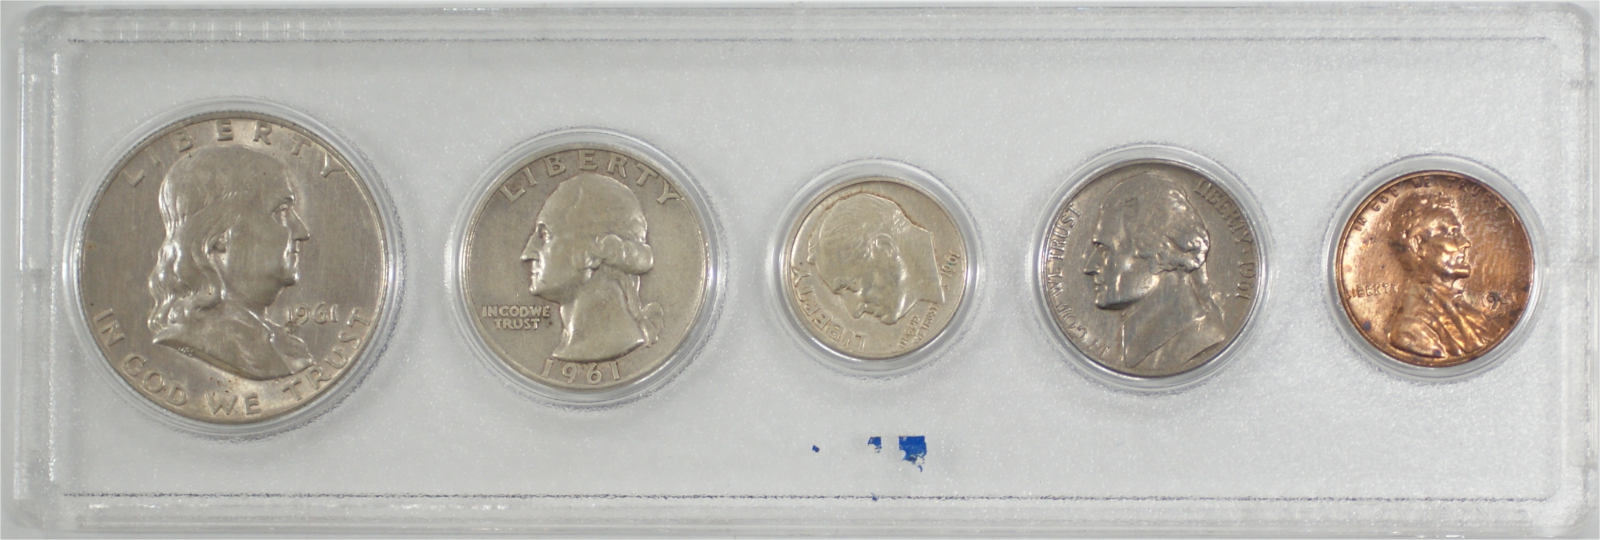 1961 Complete US Coin Year Set in Clear Plastic Whitman Holder